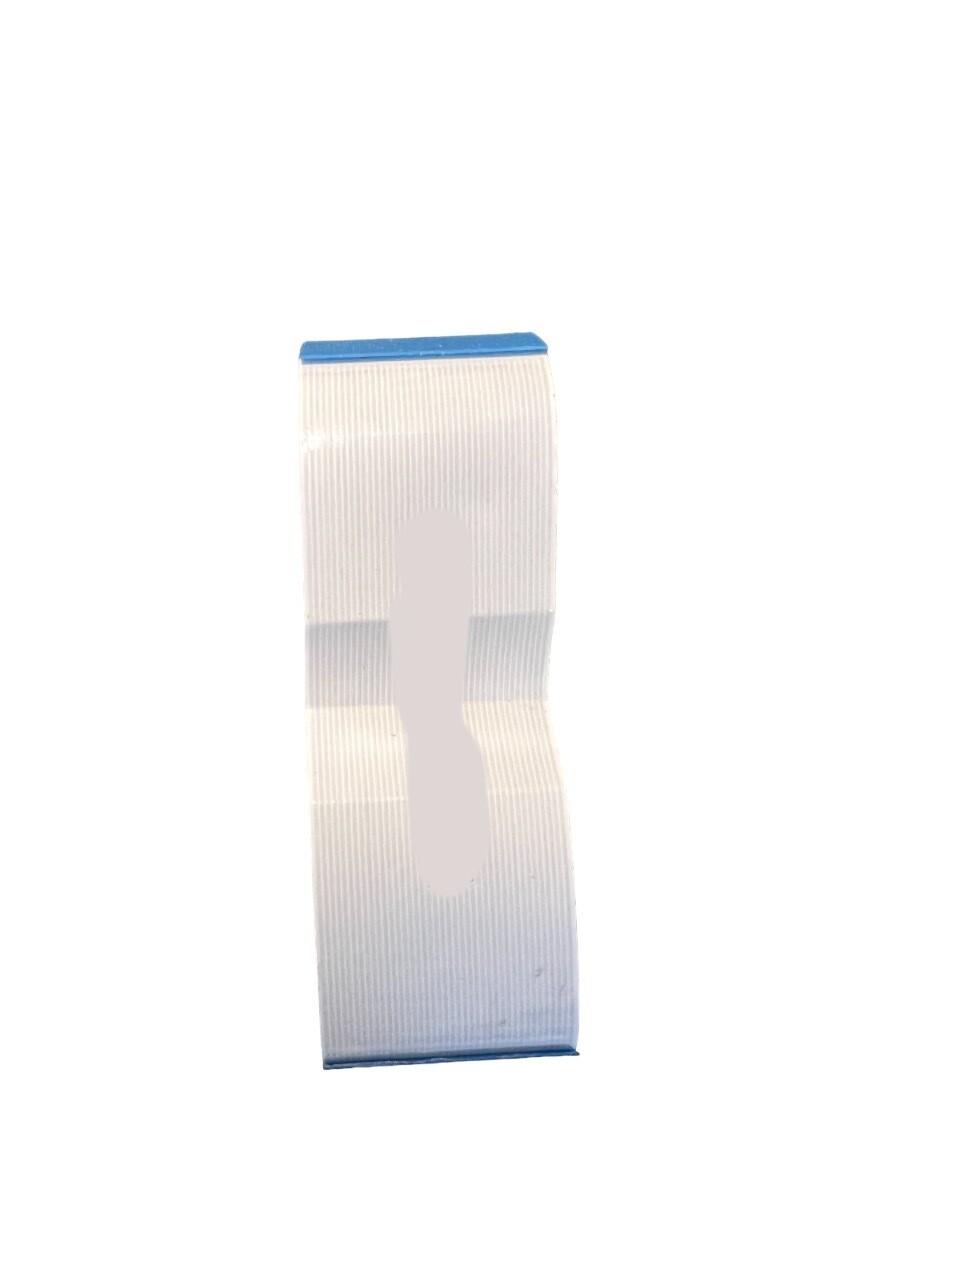 Ribbon Cable for Bose Wave music system III